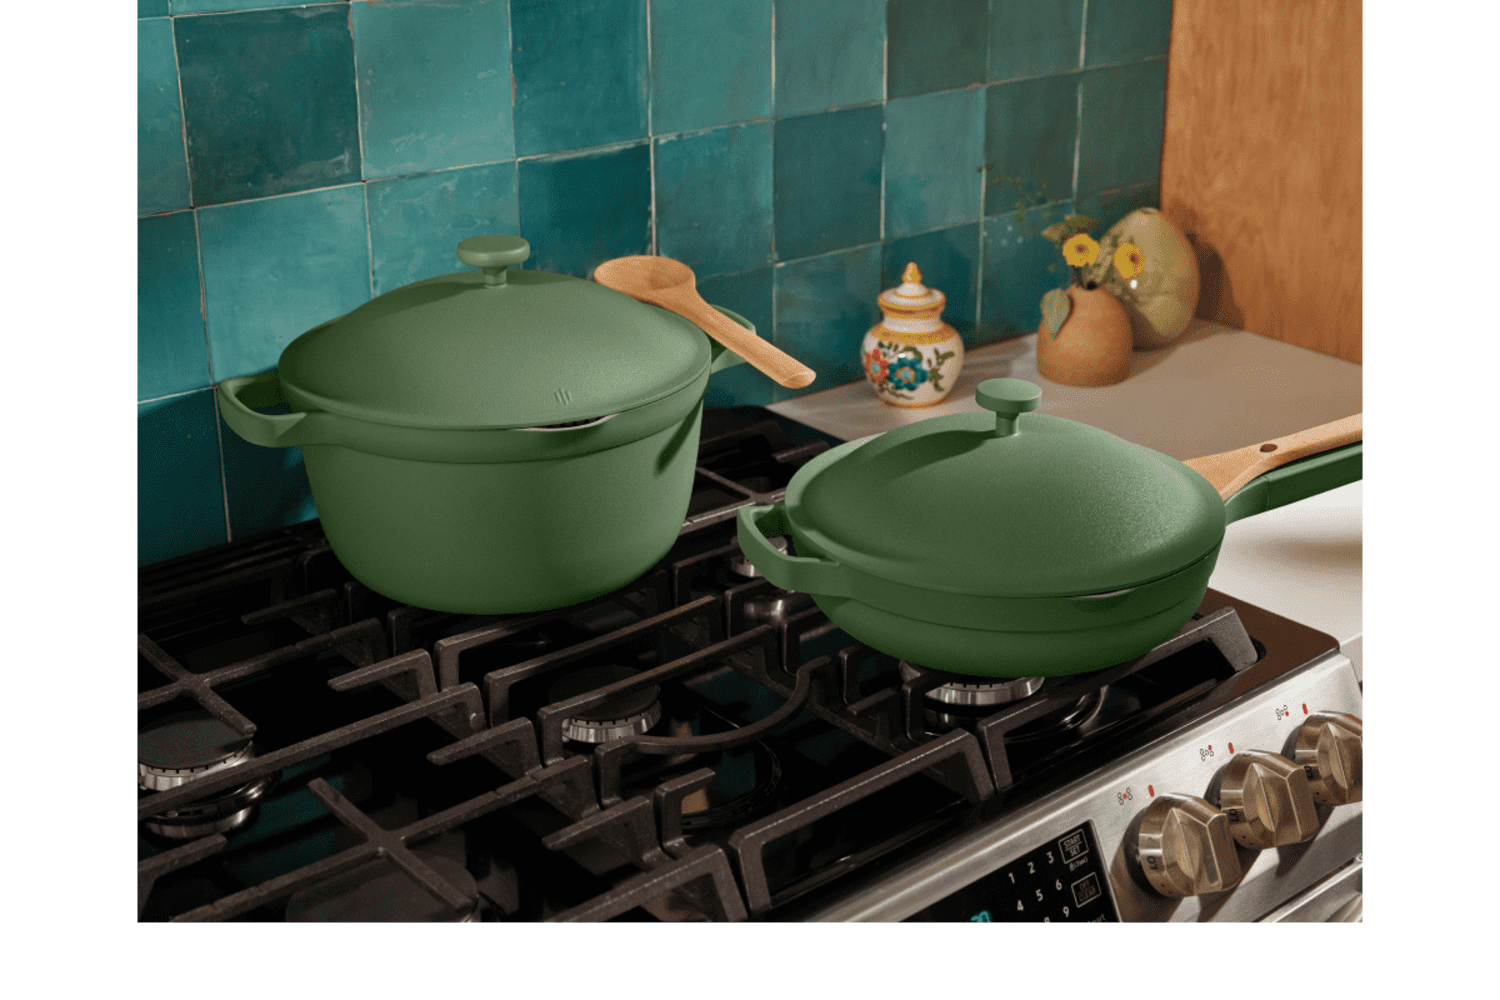 Our Place's Always Pan and Perfect Pot Available in Limited-Edition  Colourway